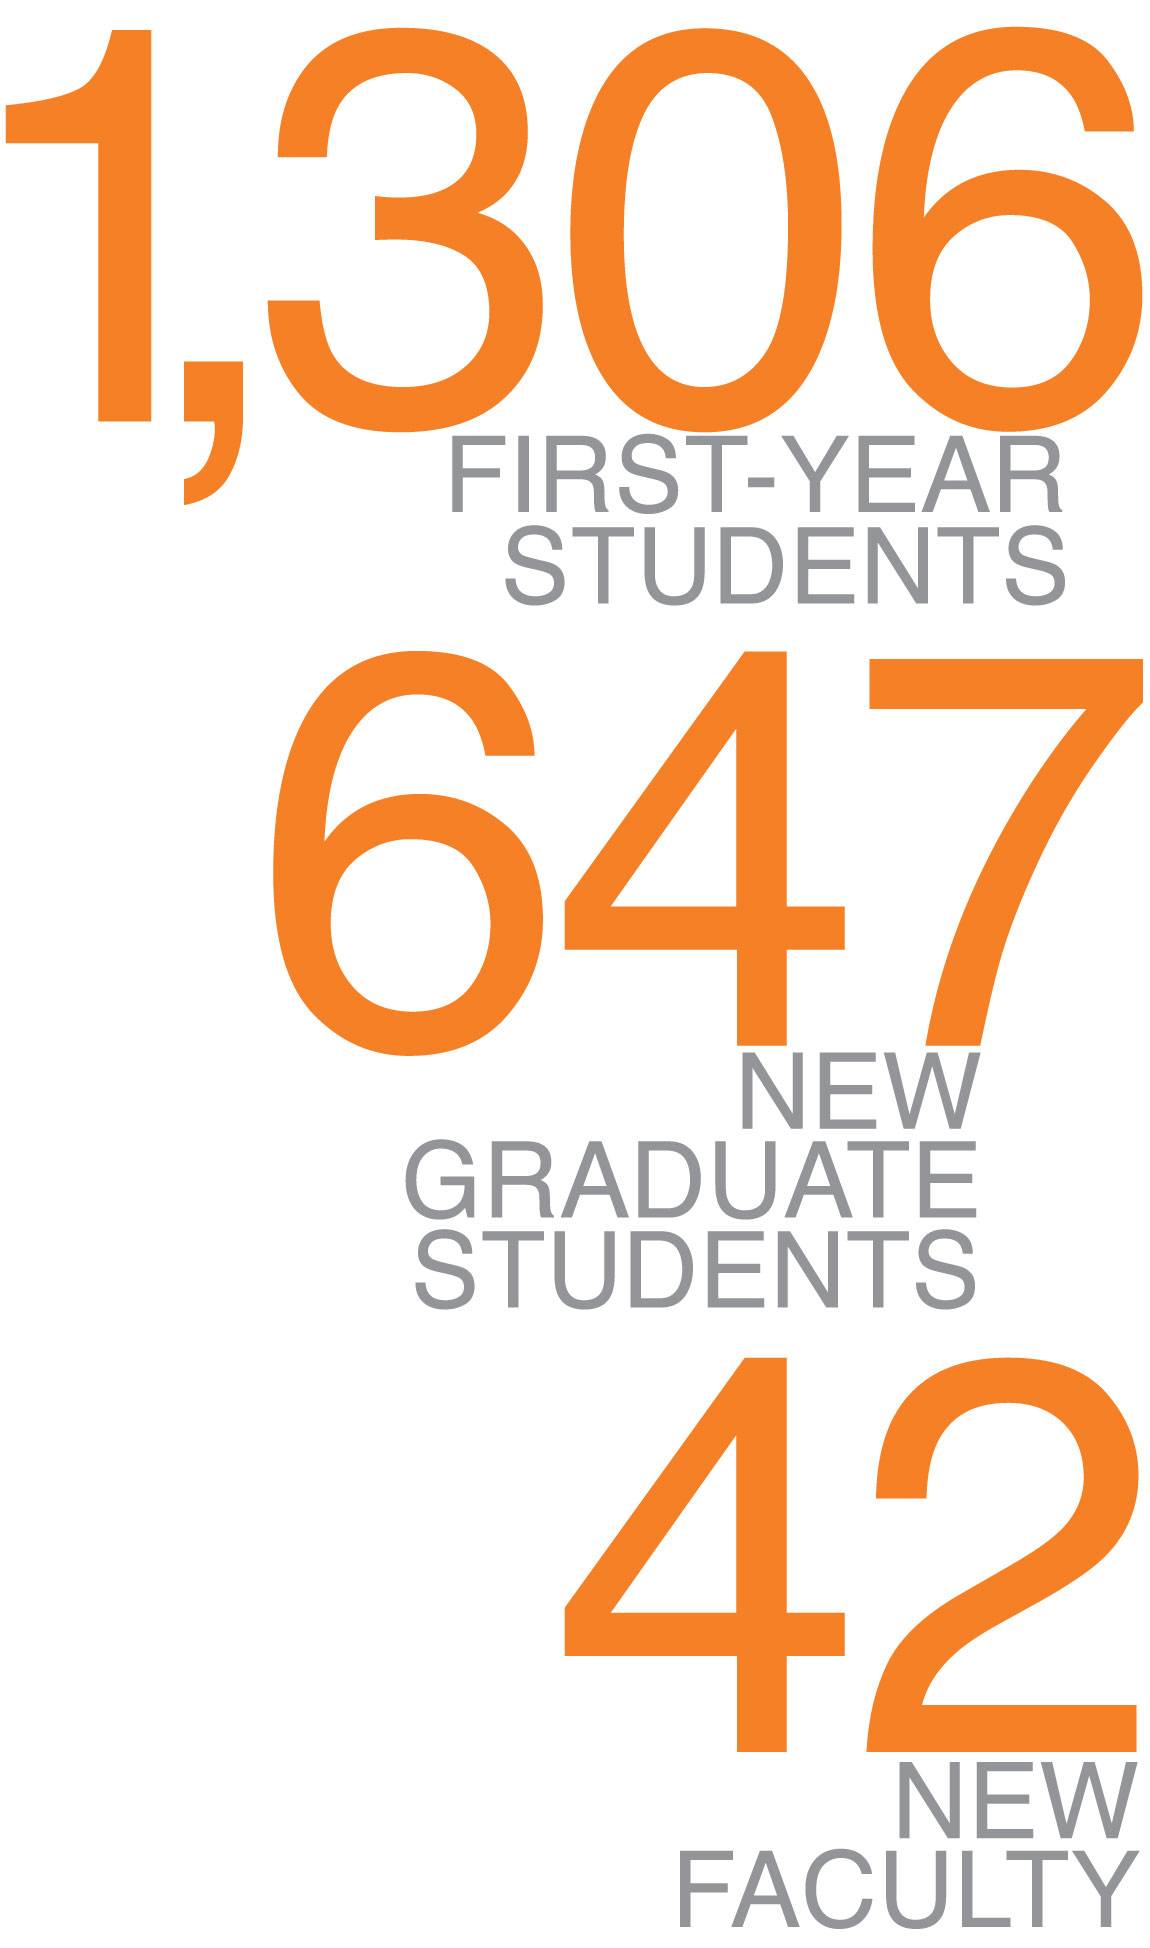 “1,306 first-year students; 647 new graduate students; 42 new faculty”